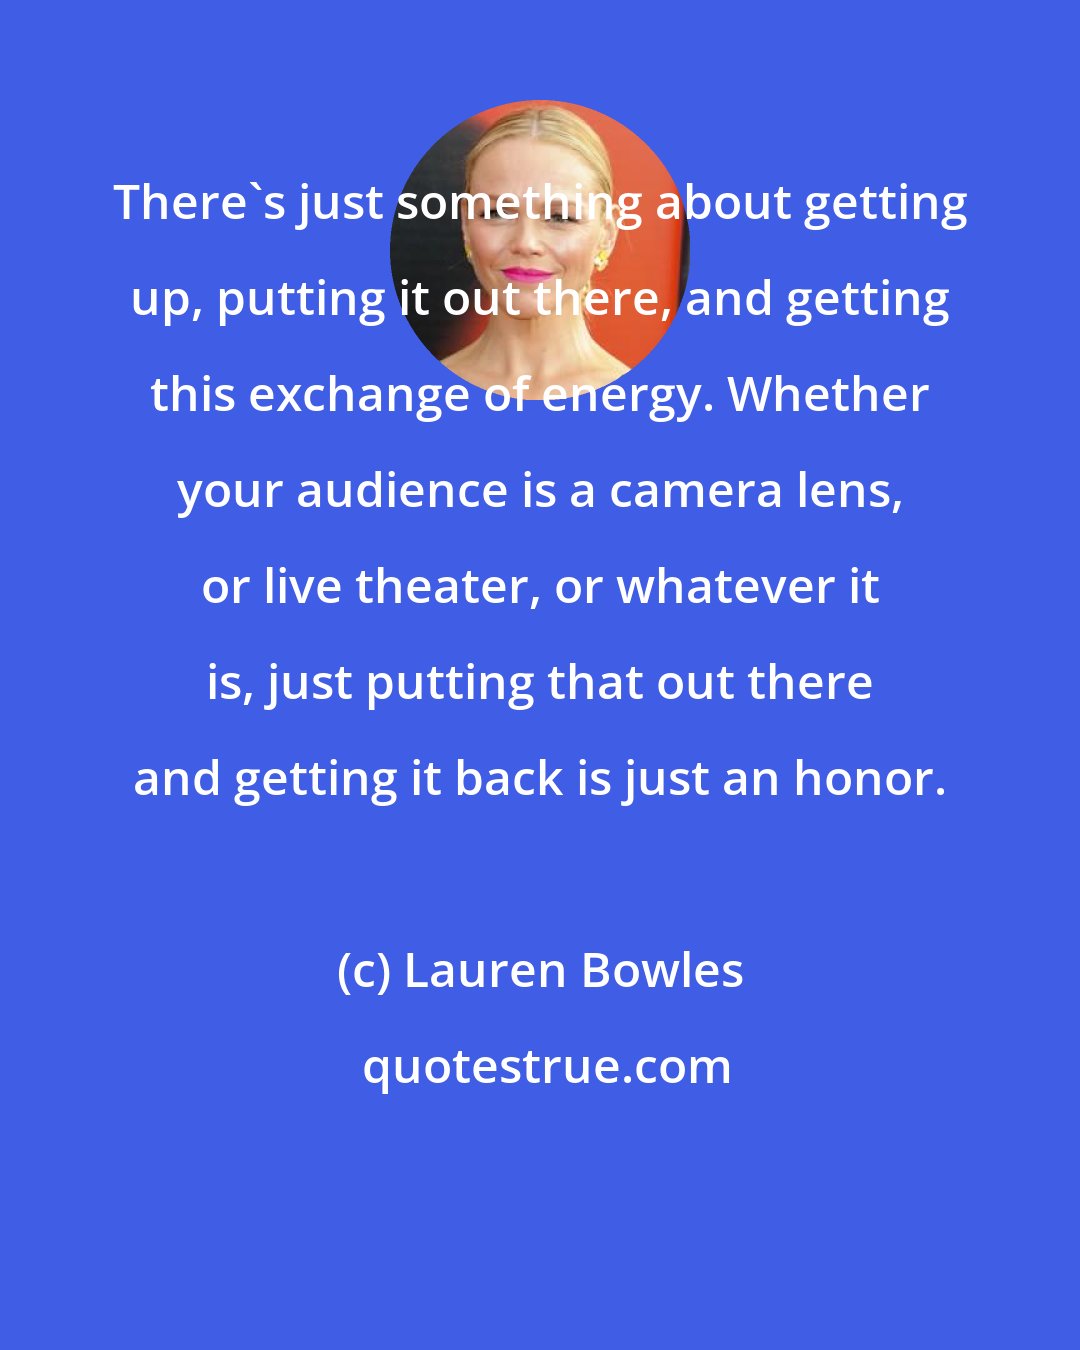 Lauren Bowles: There's just something about getting up, putting it out there, and getting this exchange of energy. Whether your audience is a camera lens, or live theater, or whatever it is, just putting that out there and getting it back is just an honor.